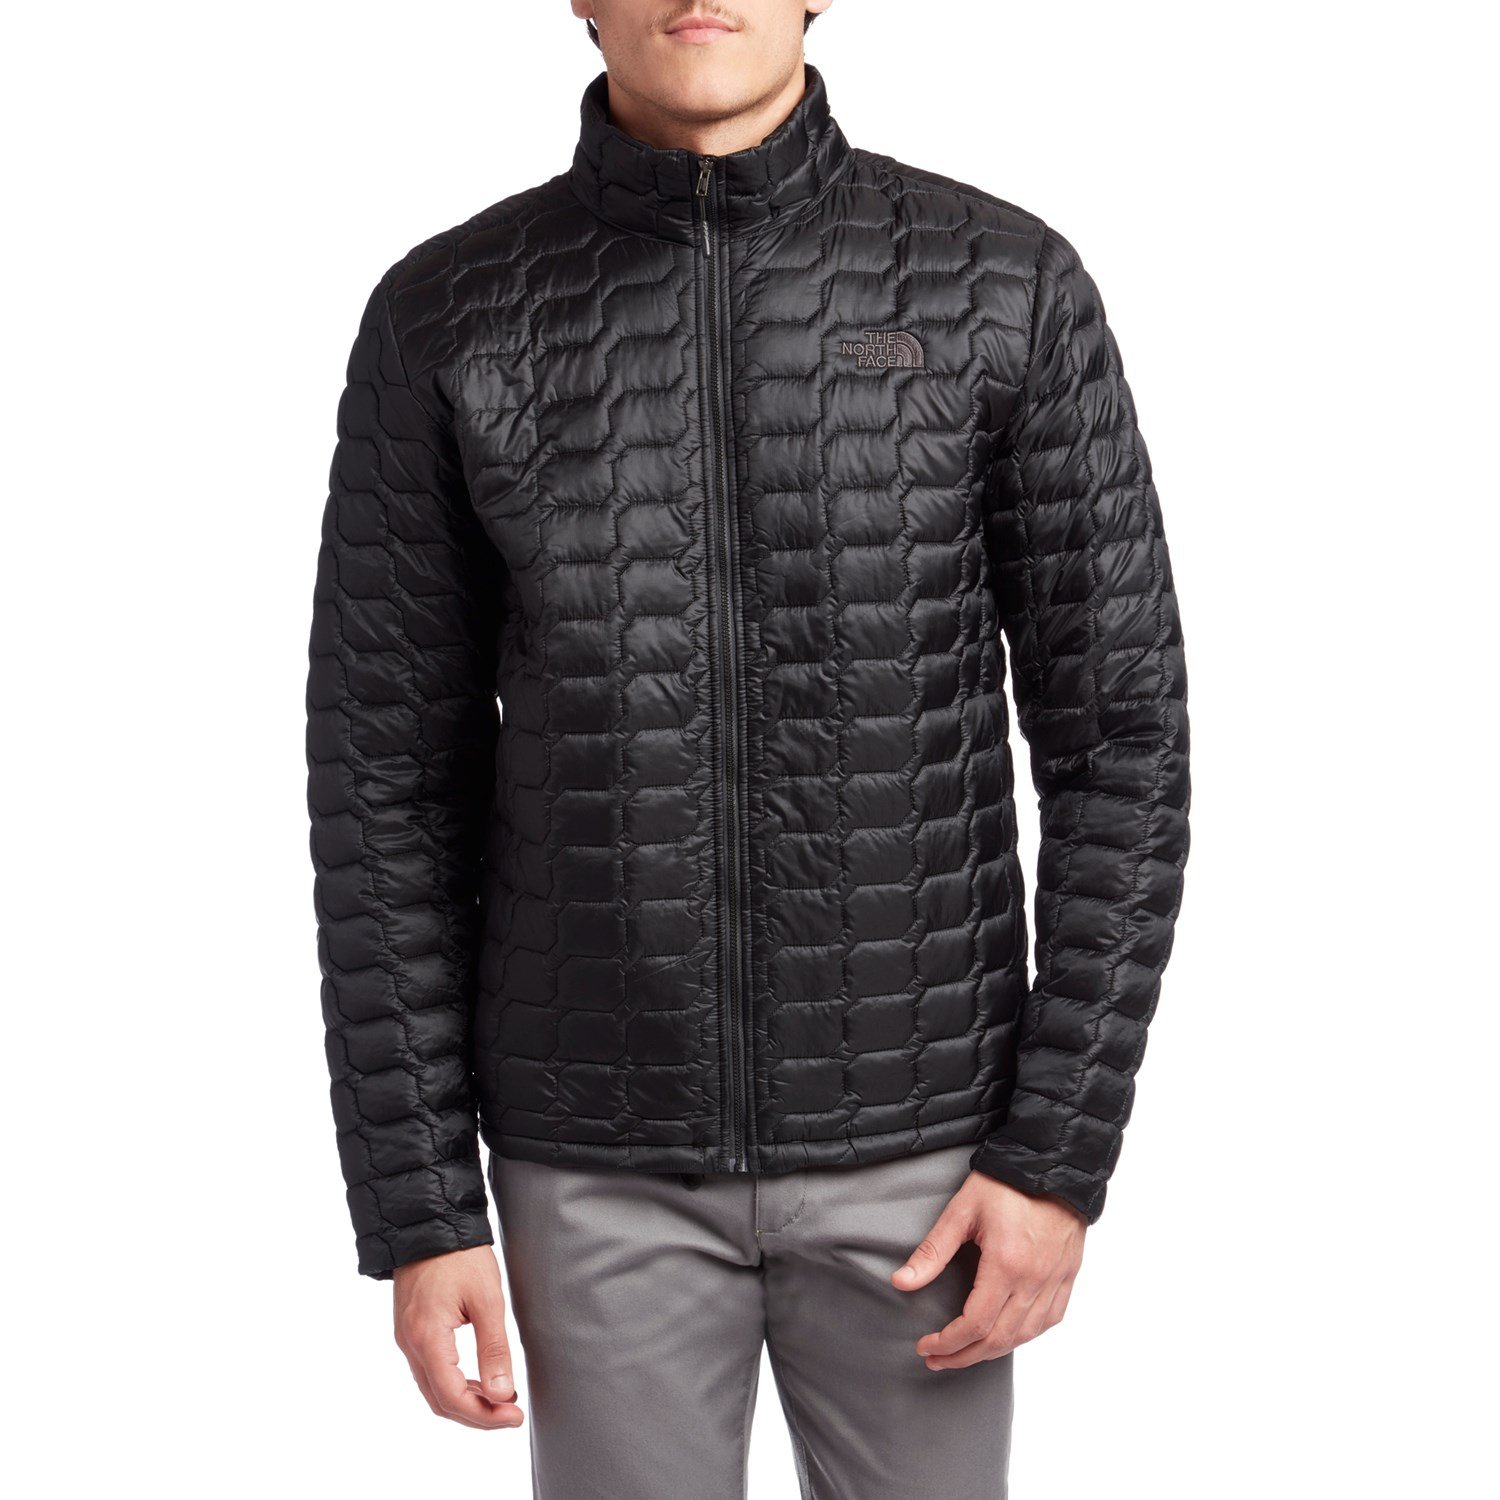 thermoball jacket the north face